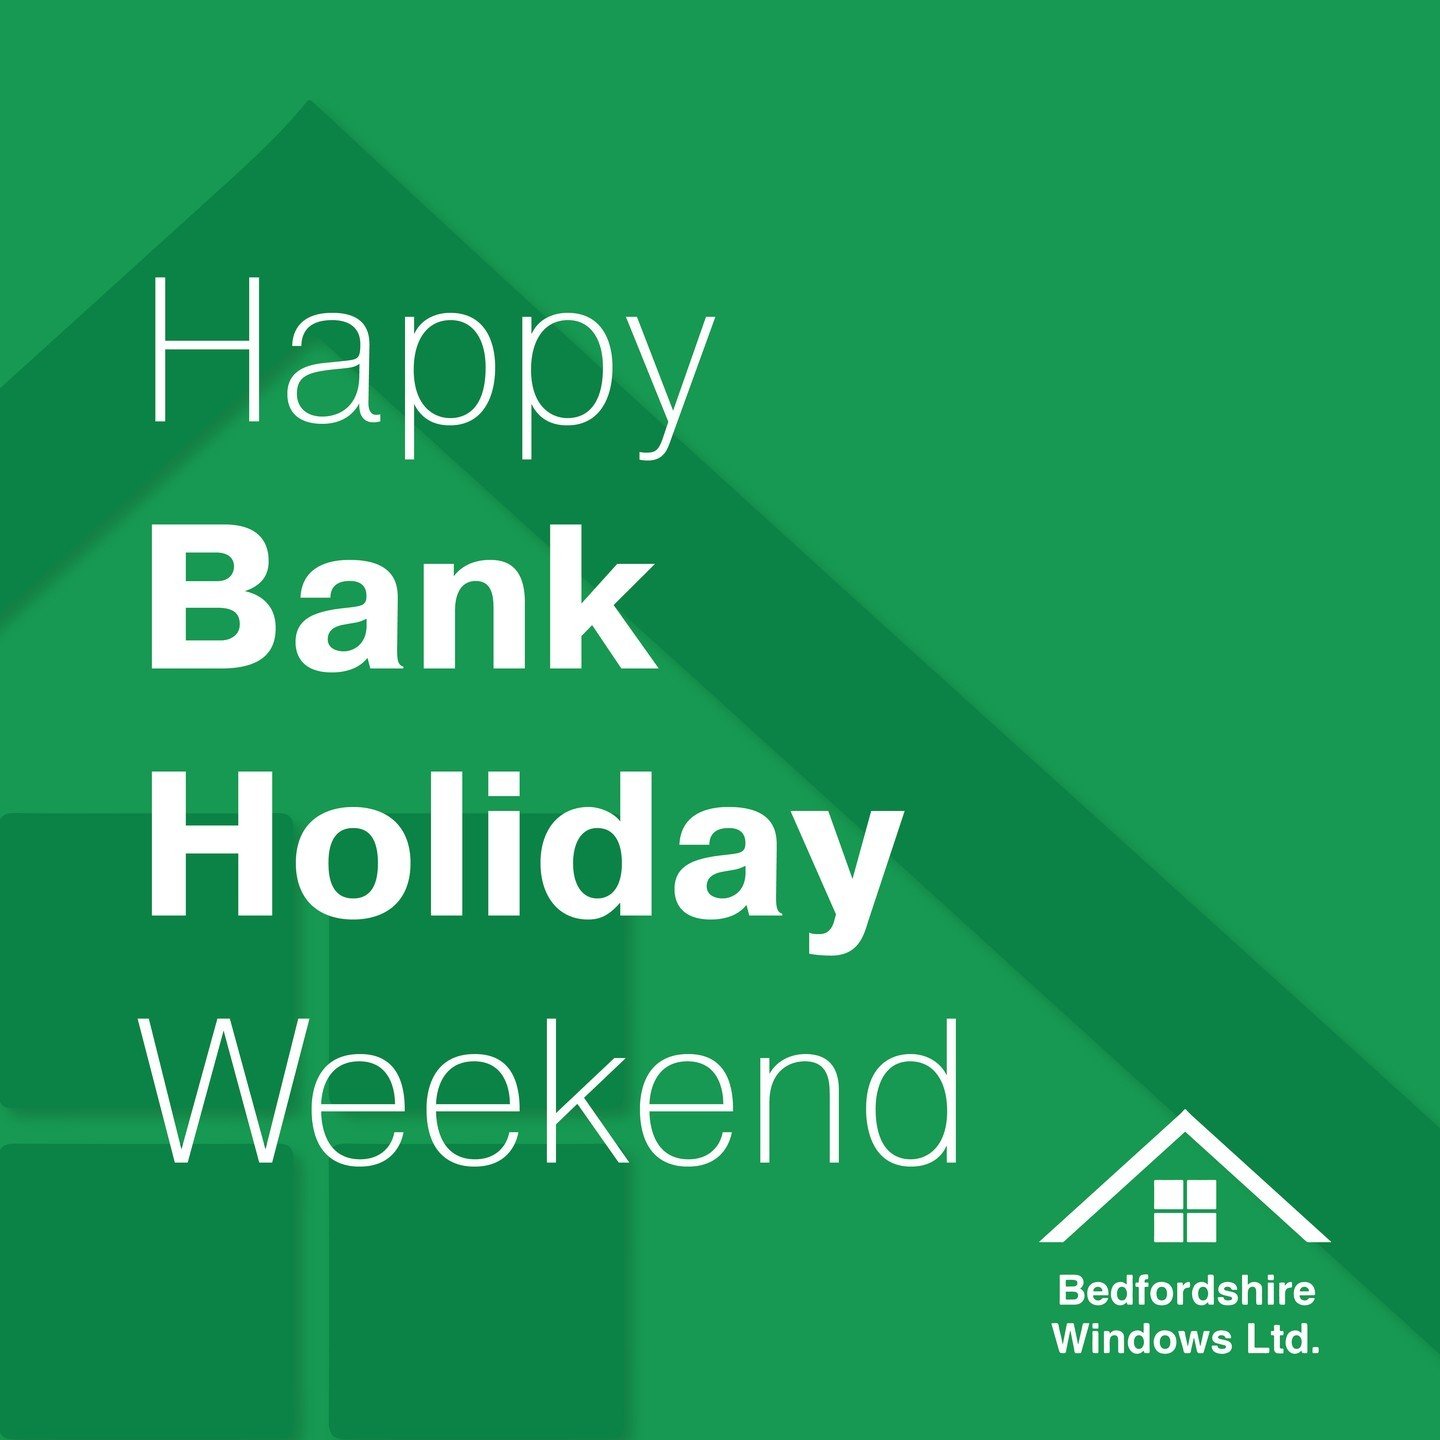 Happy bank holiday from the team at Bedfordshire Windows!

How are you spending the long weekend?

We&rsquo;re closed on Monday 6 May and will re-open on Tuesday 7 May.

#MayBankHoliday #BedfordshireWindows #BedfordshireBusiness